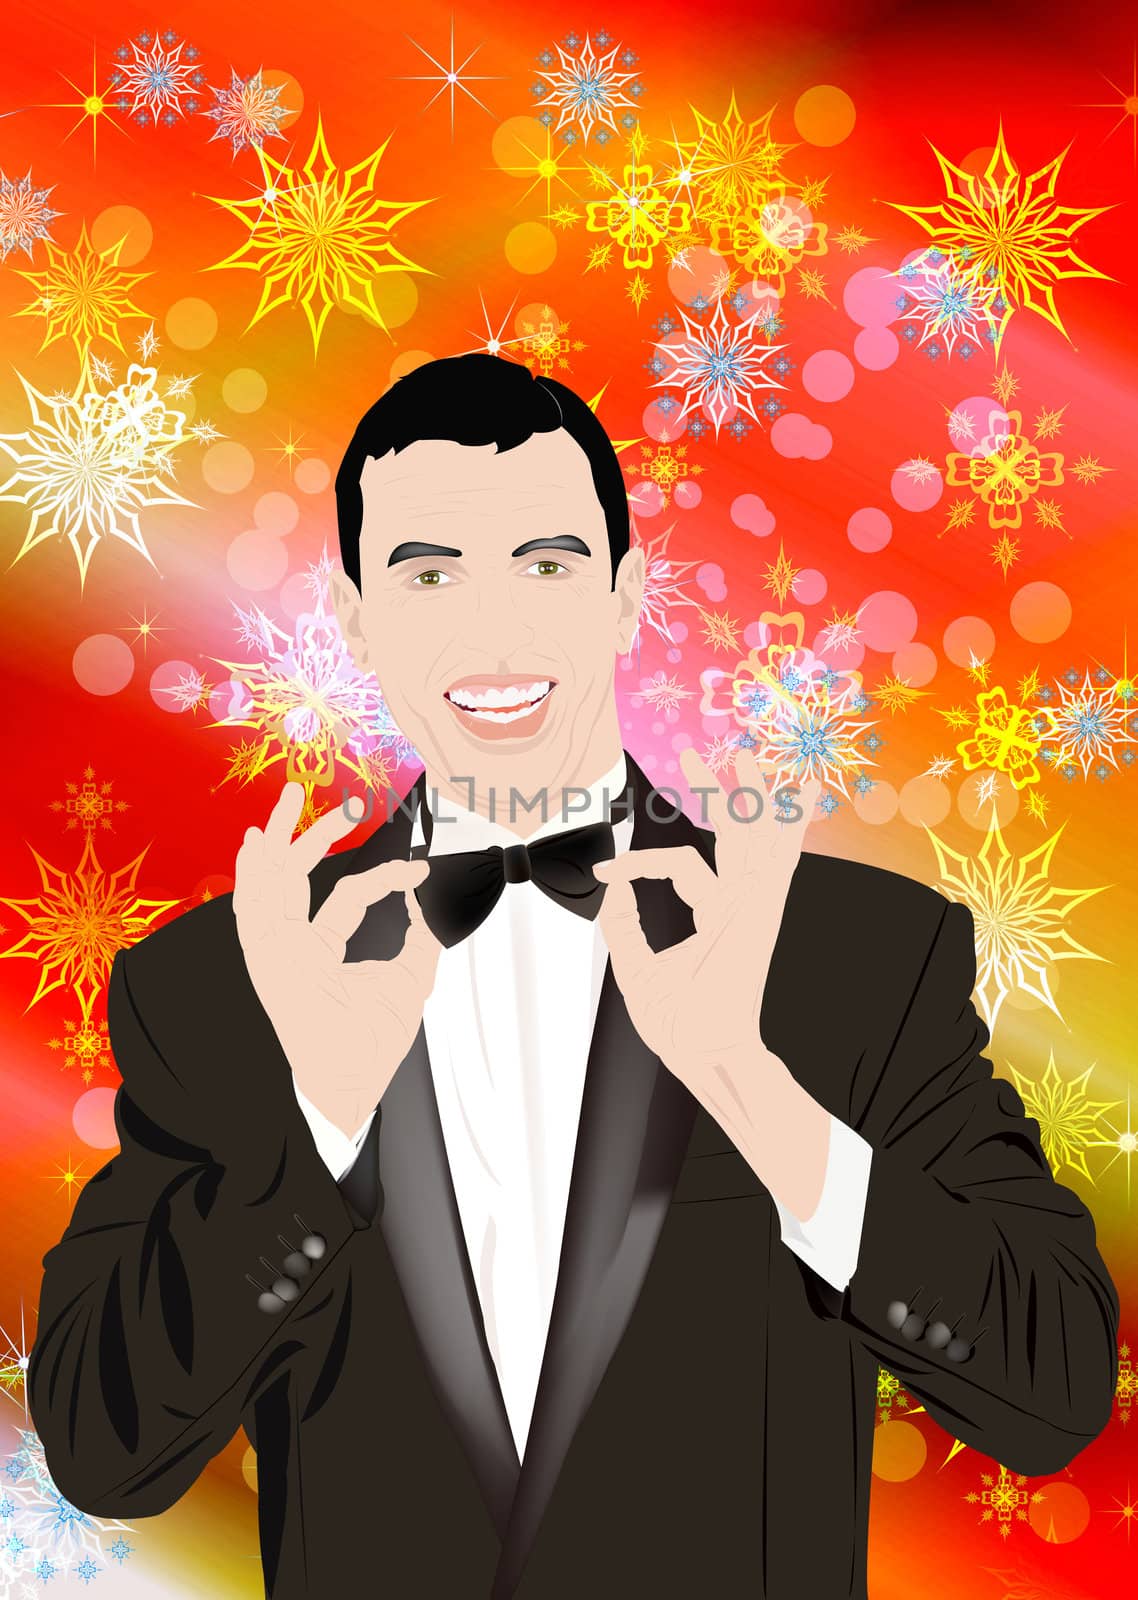 The elegant man in a classical tuxedo on a New Year's background